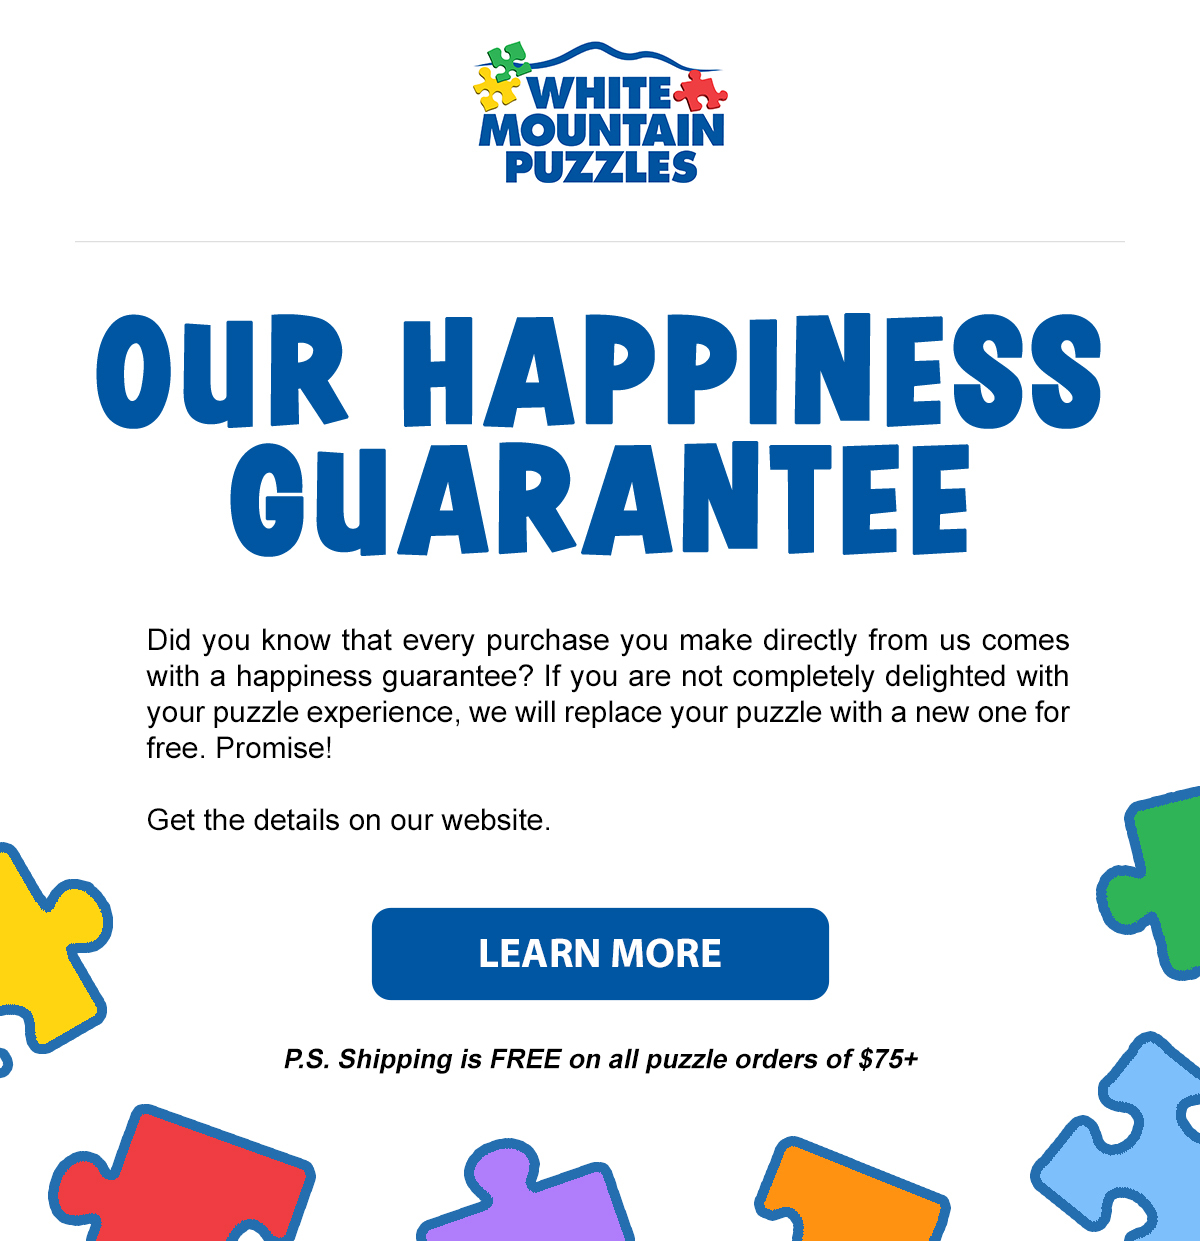 Our Happiness Guarantee. Did you know that every purchase you make directly from us comes with a happiness guarantee? If you are not completely delighted with your puzzle experience, we will replace your puzzle with a new one for free. Promise! Get the details on our website. Learn more!